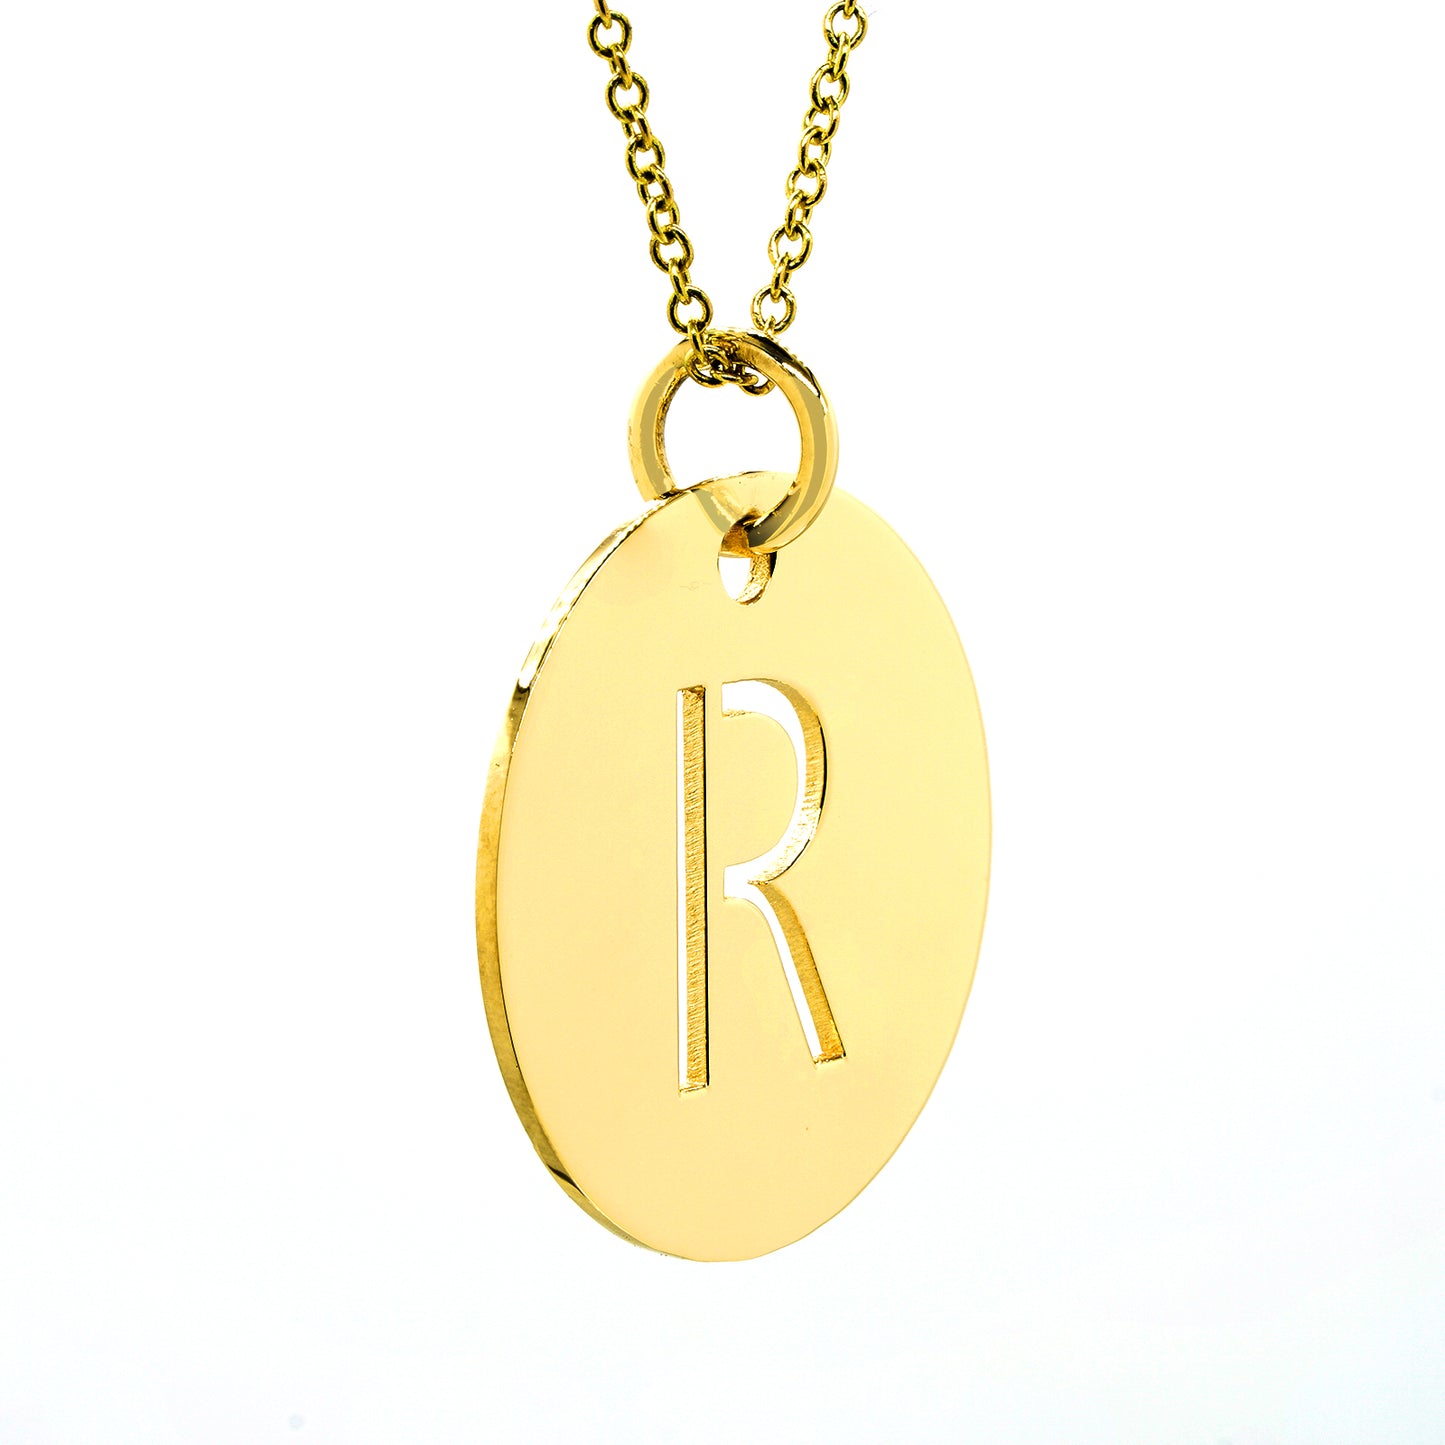 14K Gold Disk with Letter Punched Out Pendant Charm